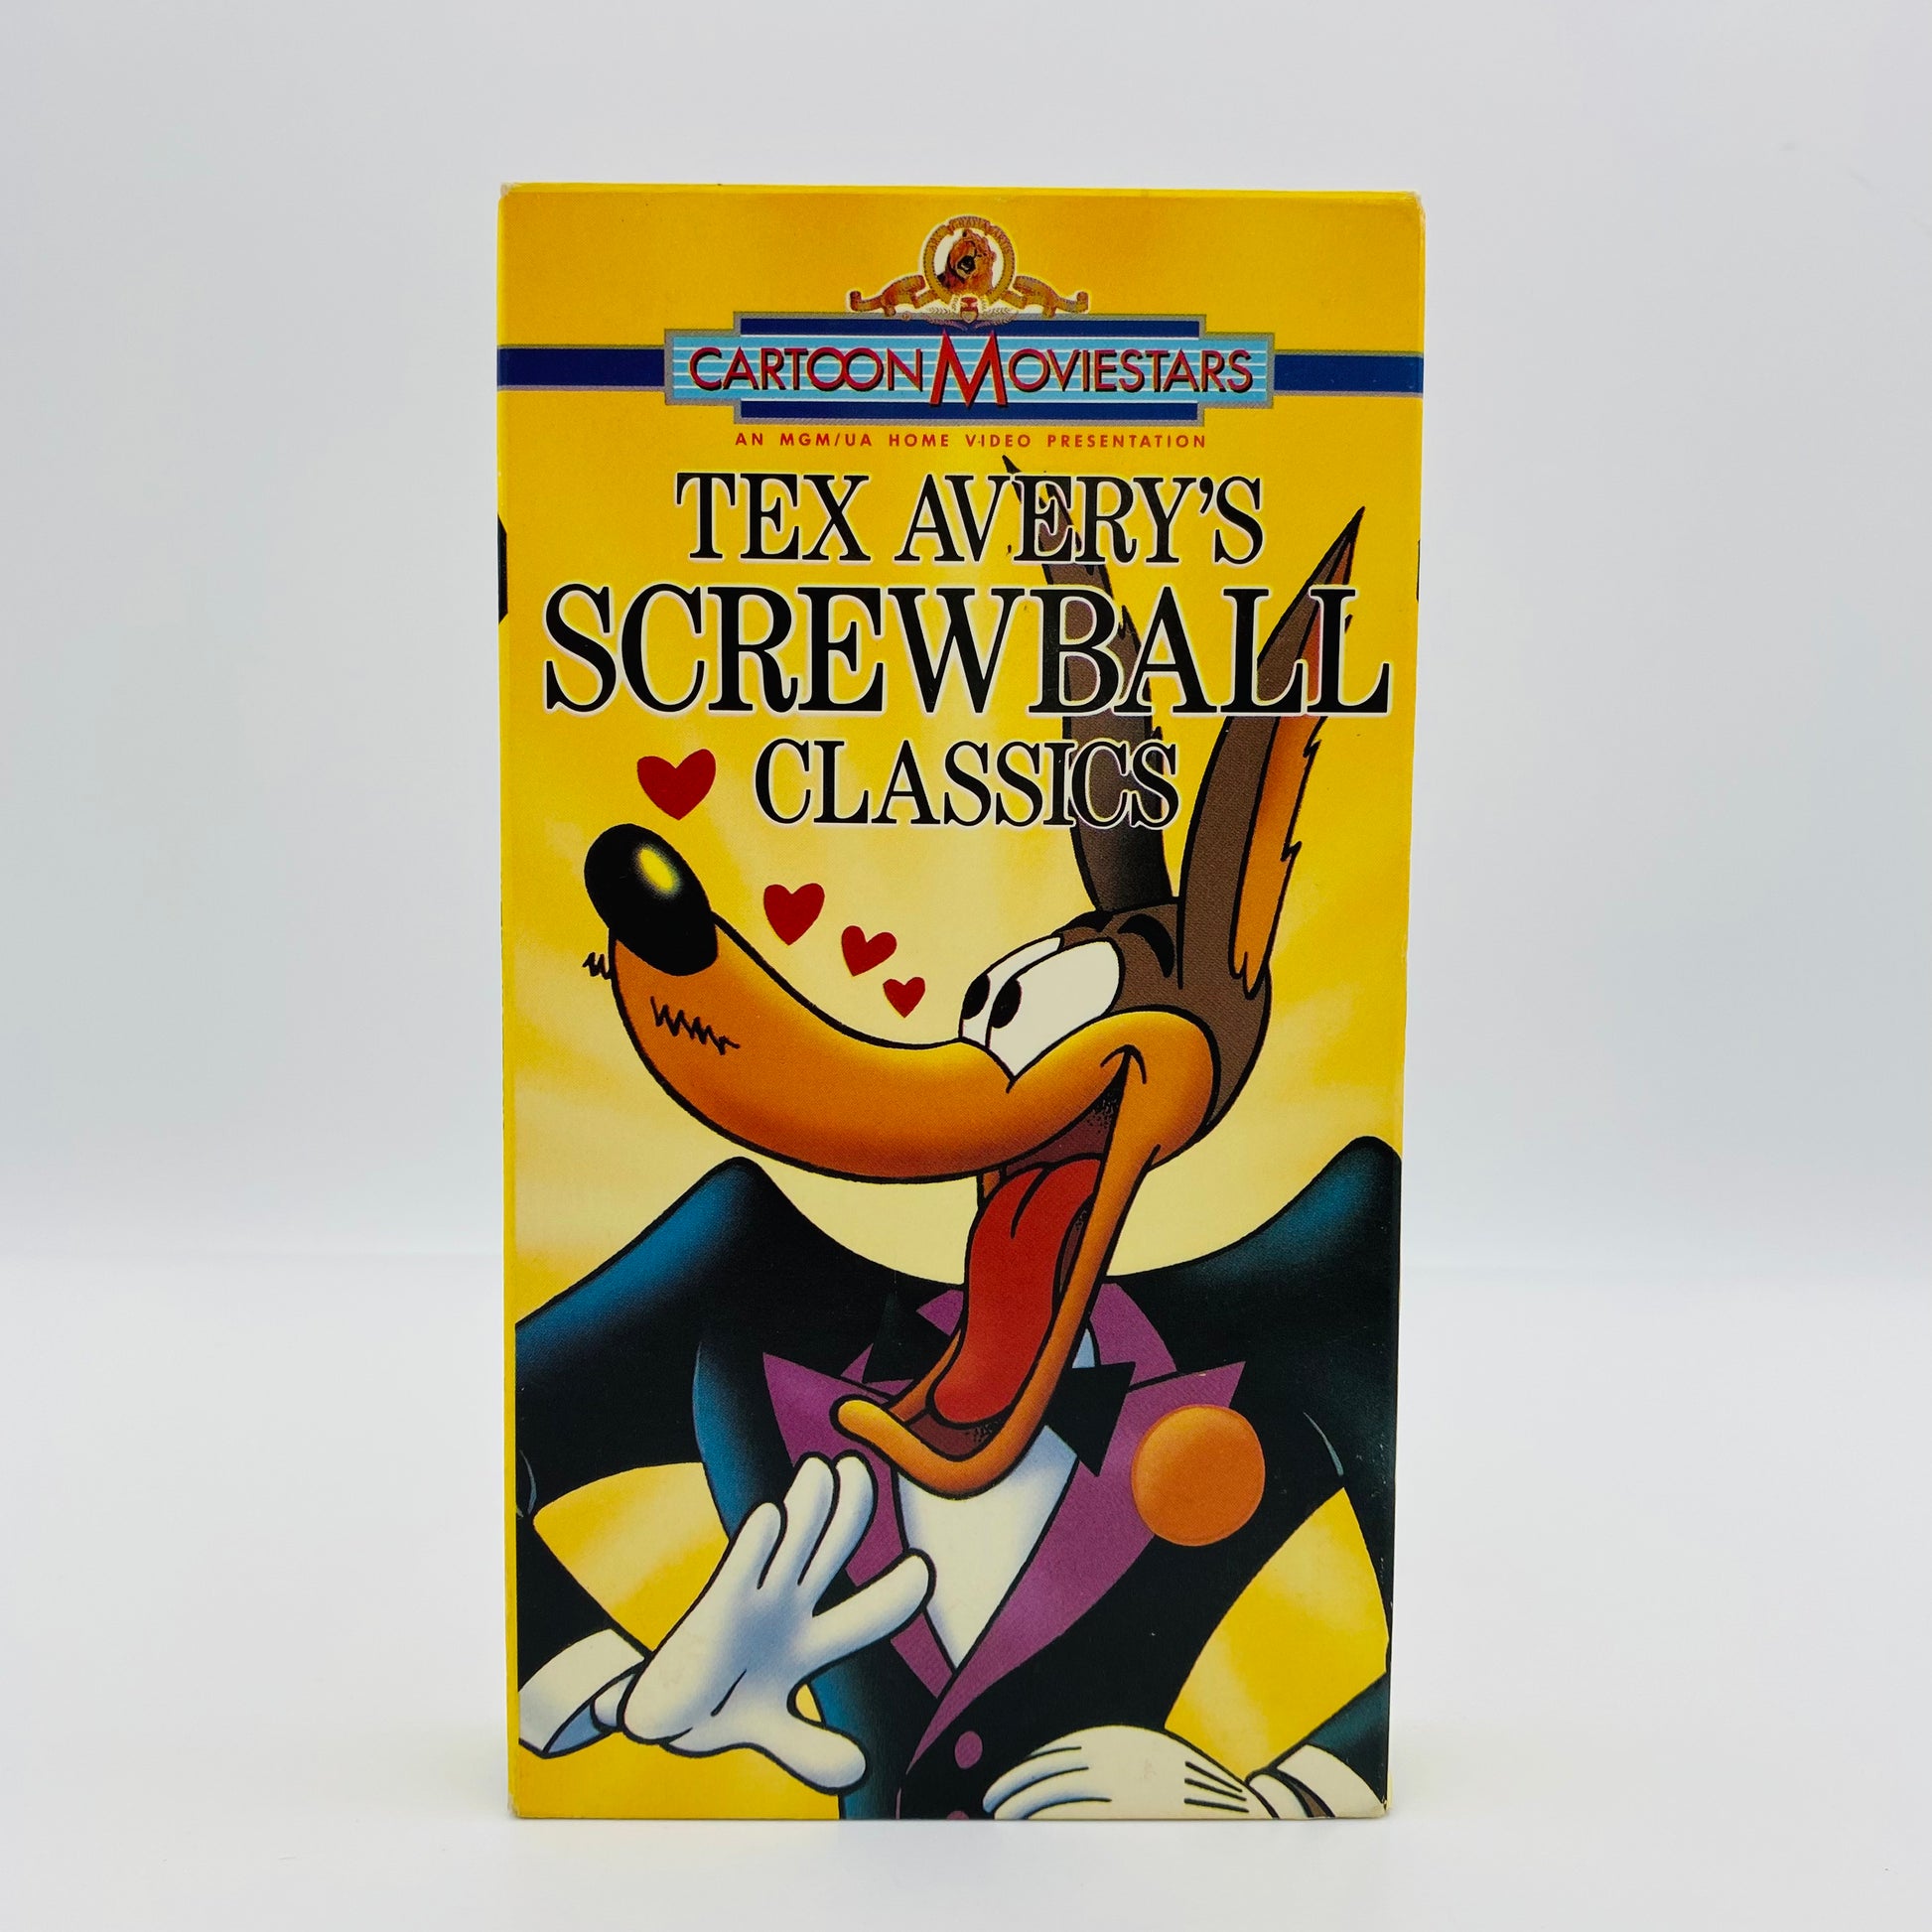 Tex Avery's Screwball Classics volumes 1-4 VHS tapes (1988, 1989 